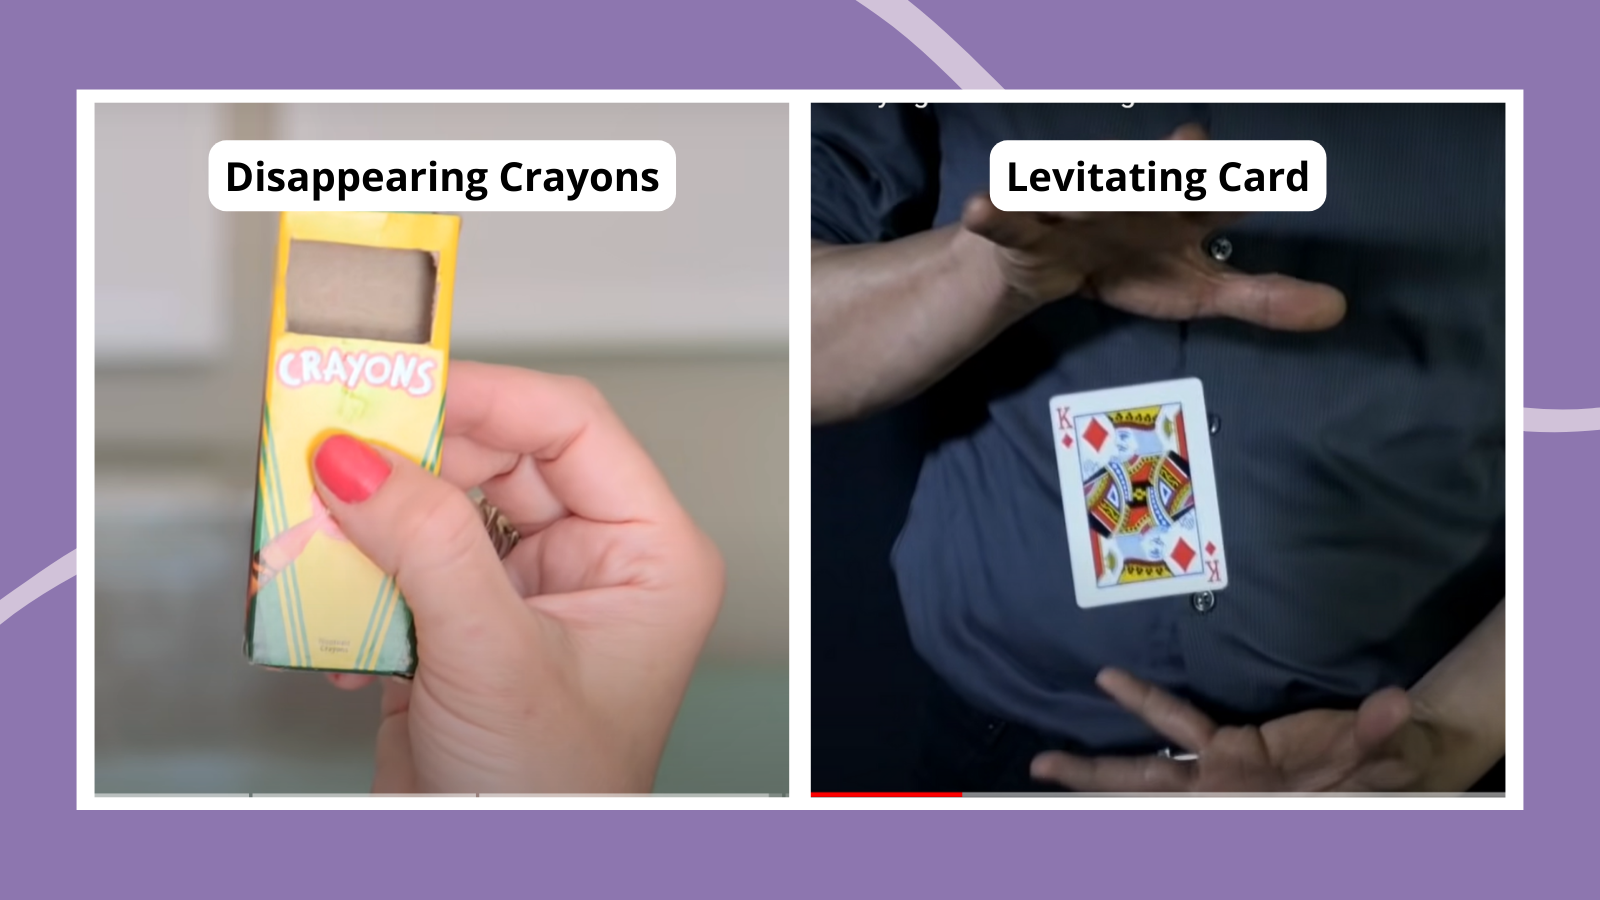 Examples of easy magic tricks for kids including disappearing crayons and levitating card.